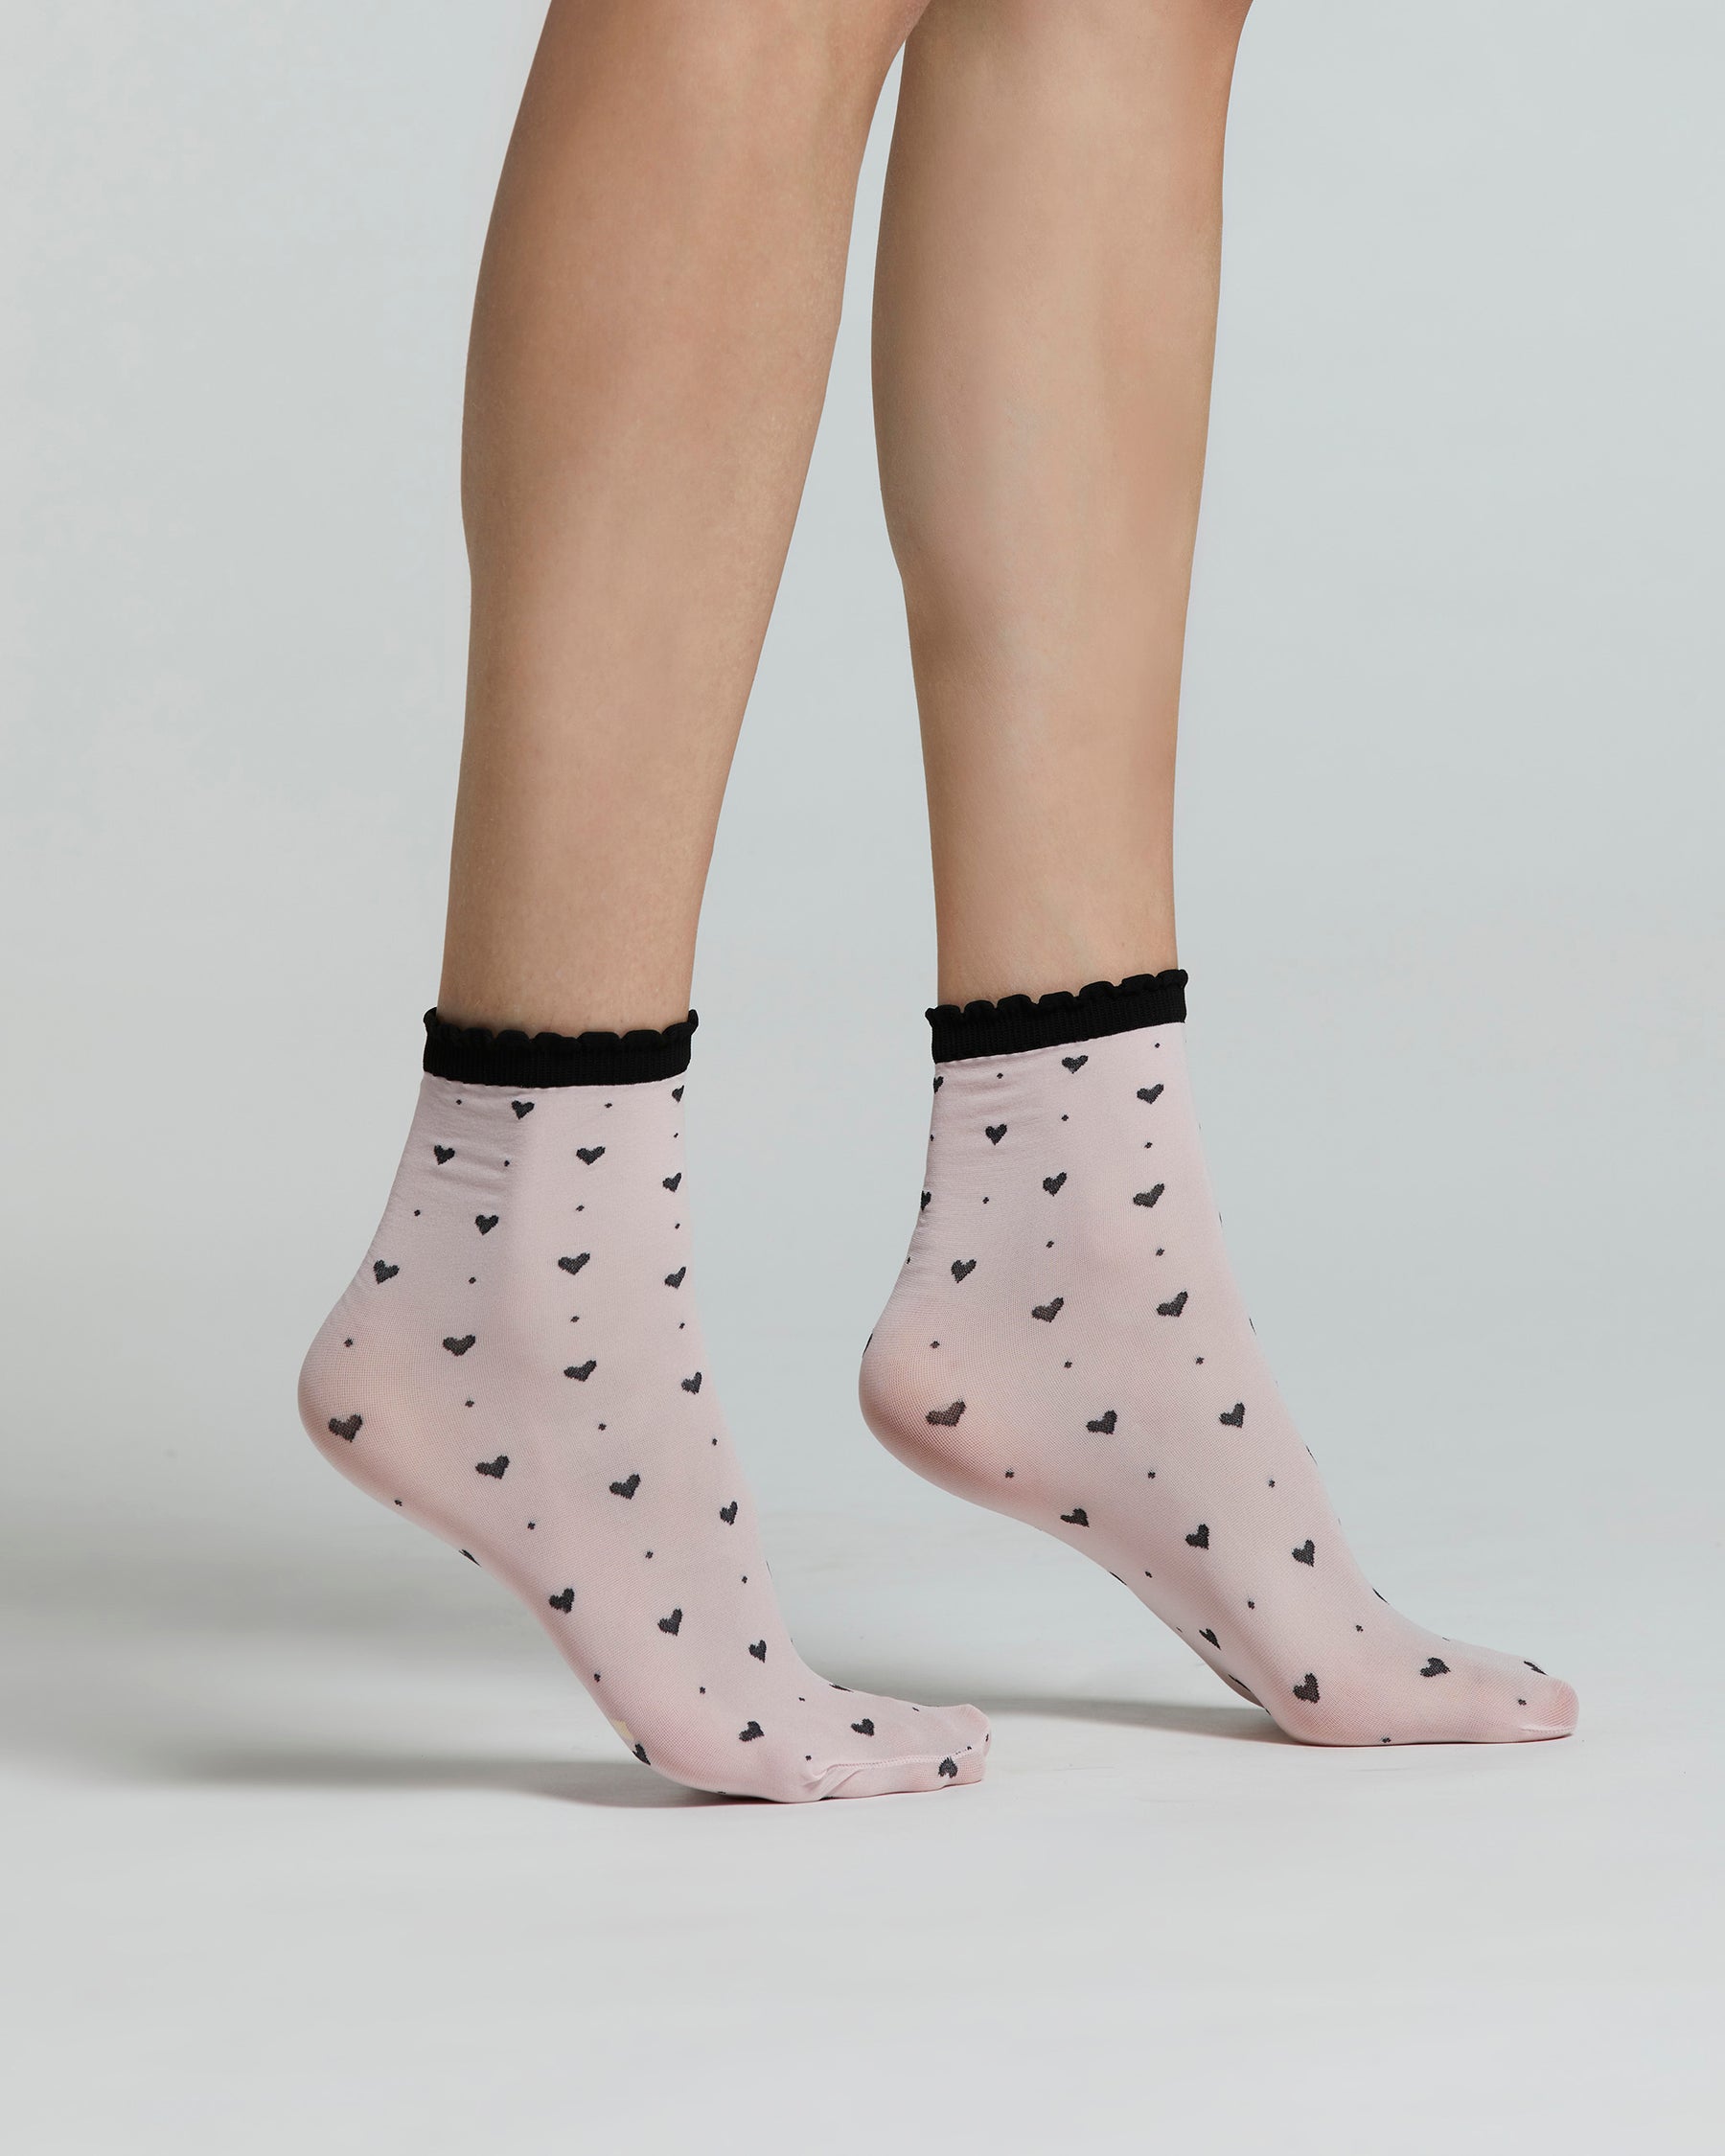 ALTHEA SOCK WITH HEART PATTERN